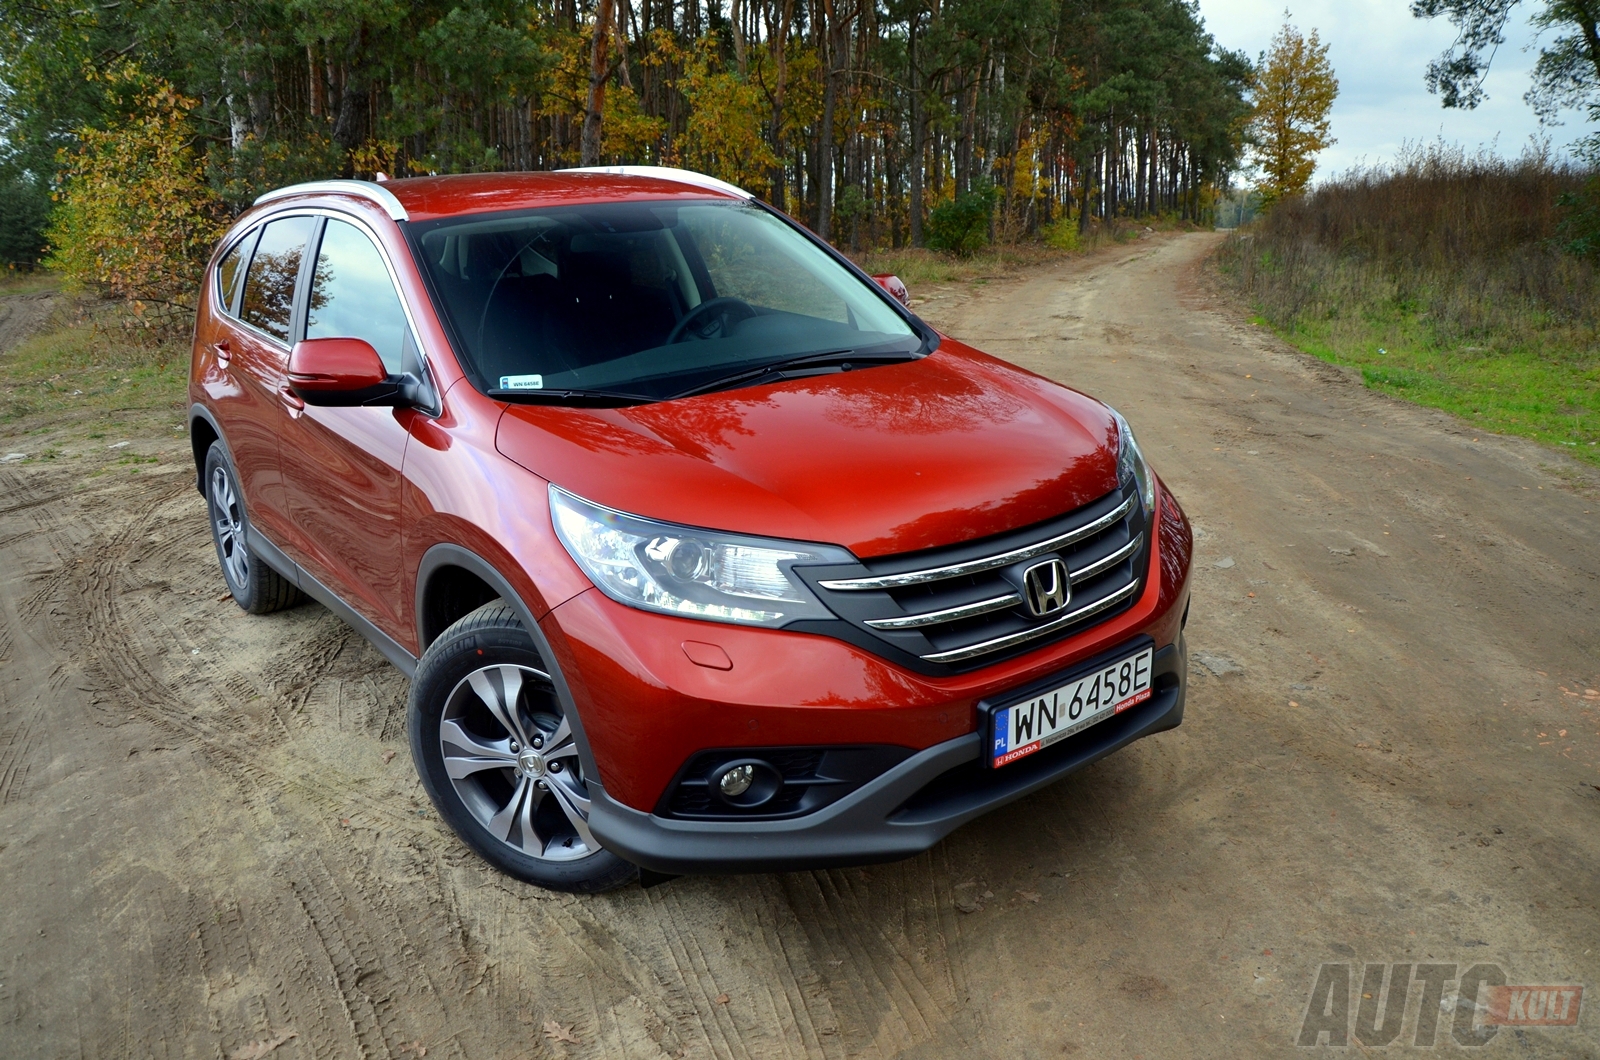 How much does it cost to lease a honda crv #2